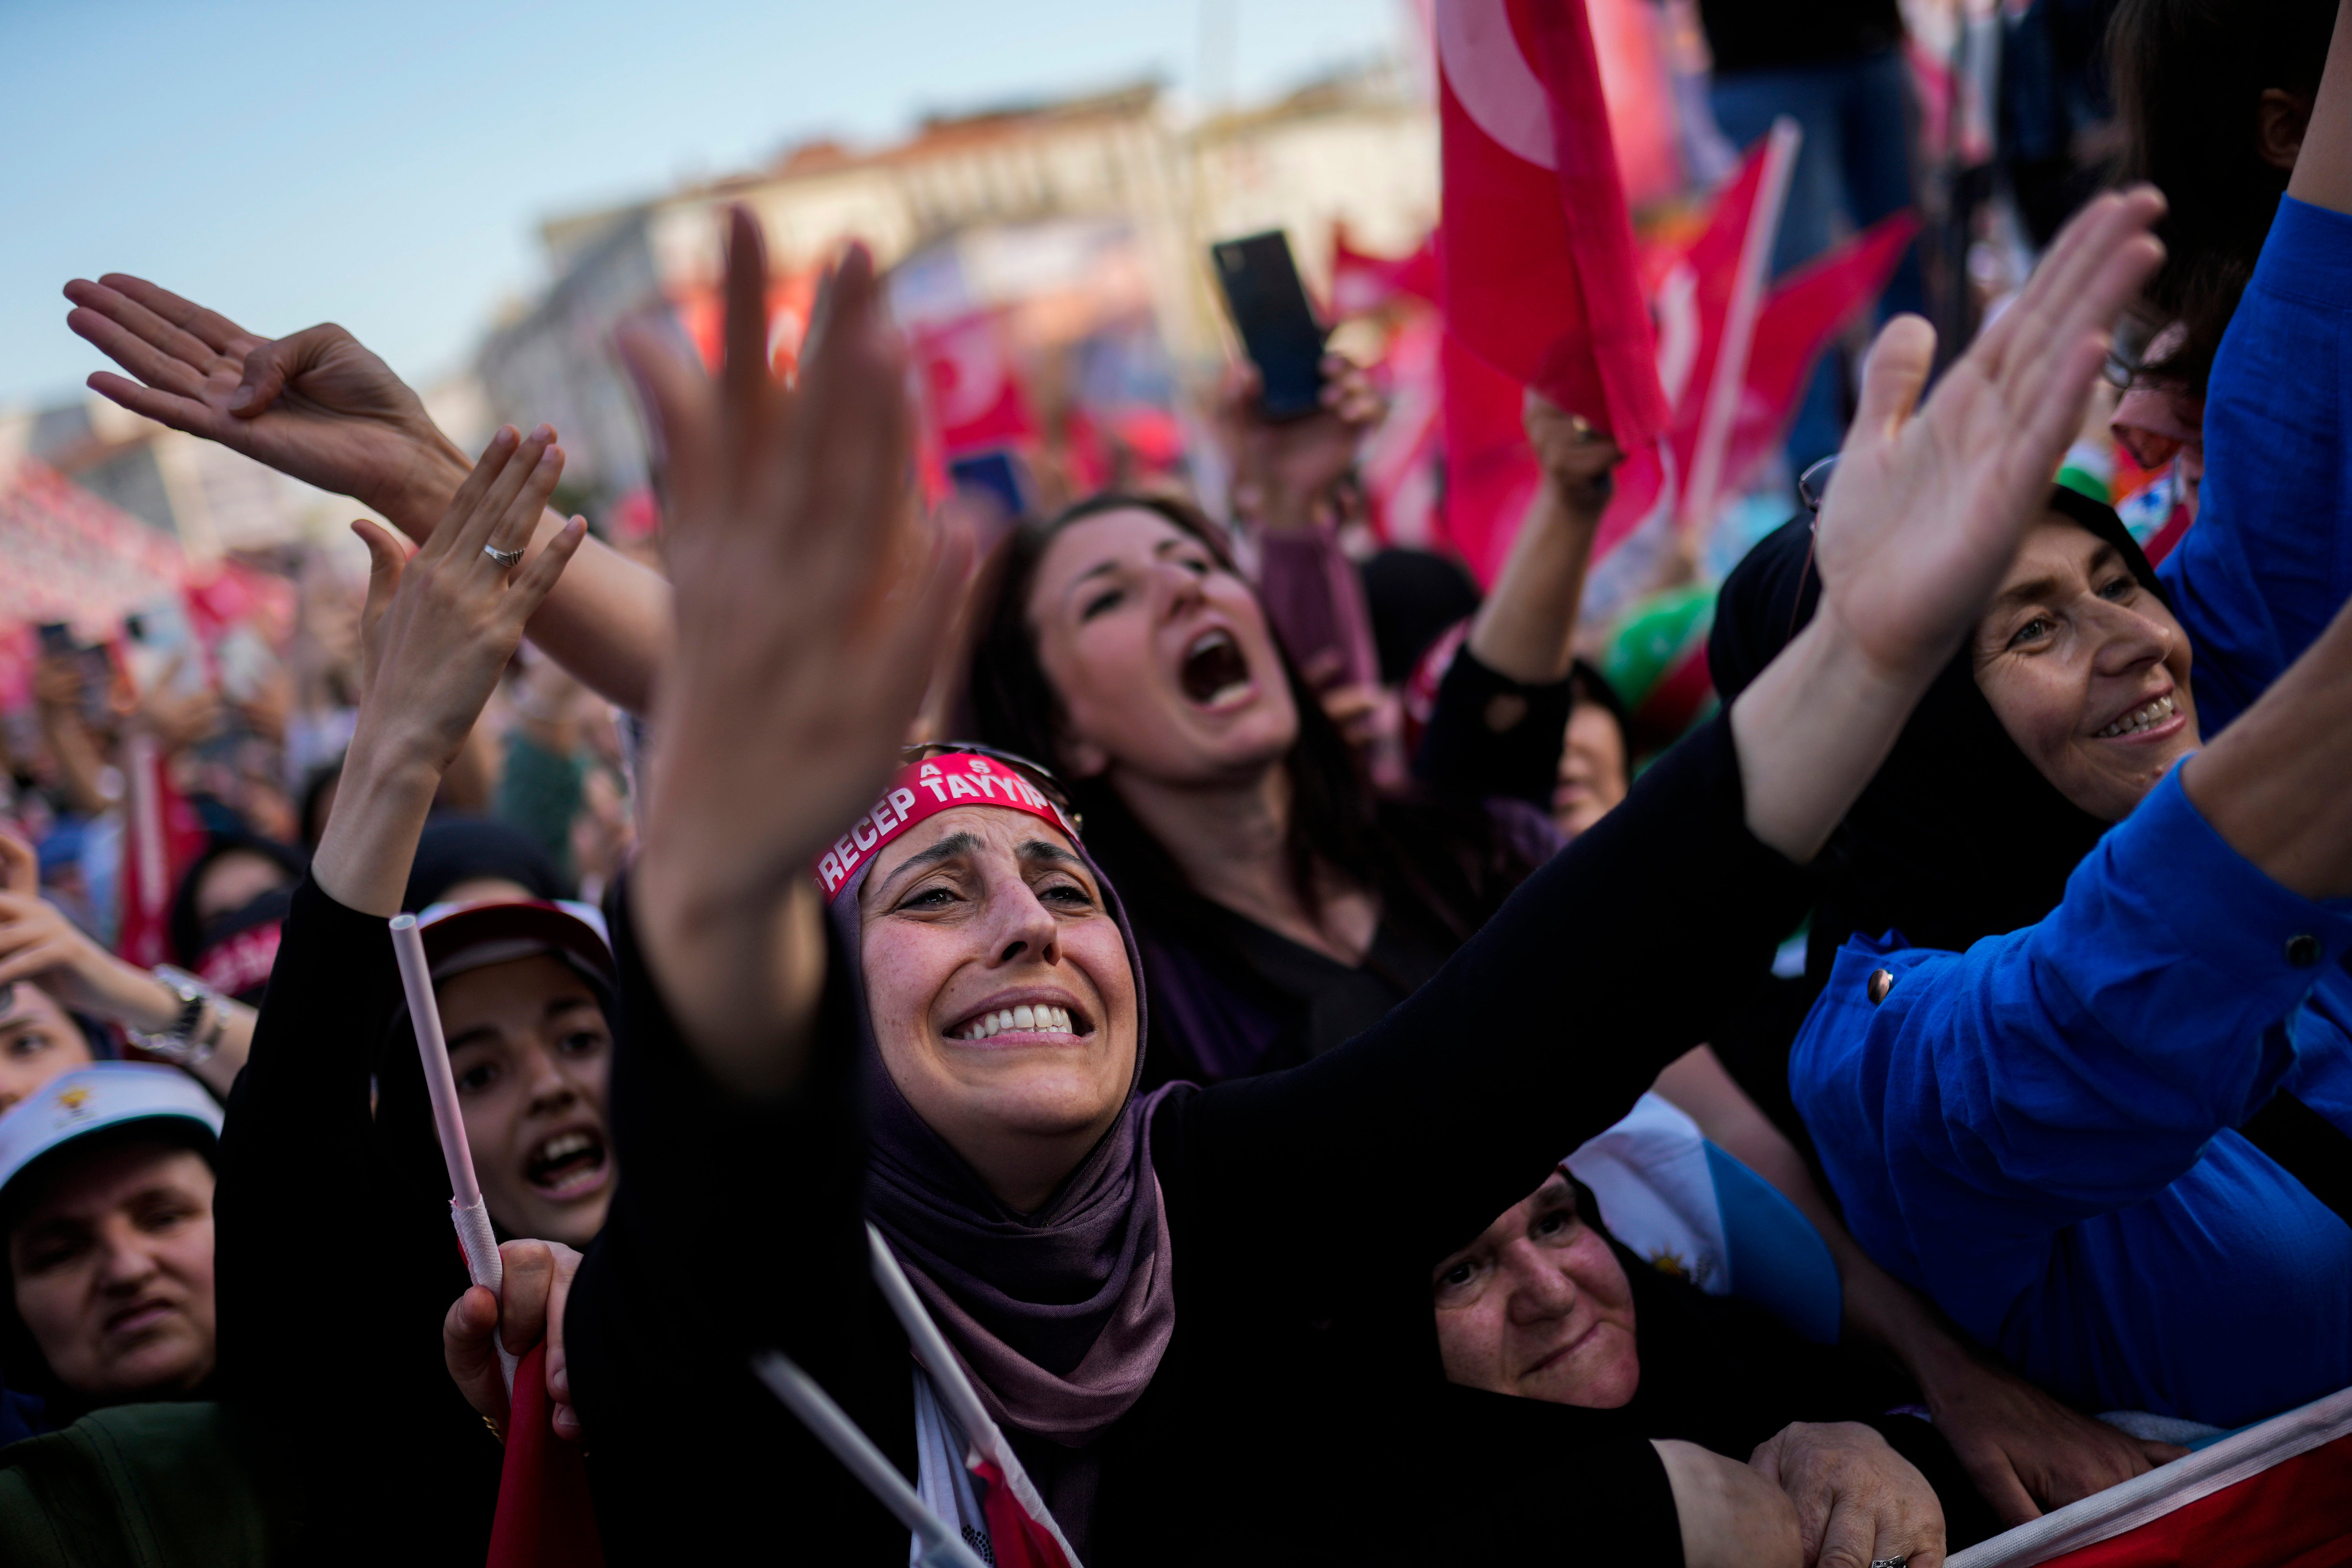 Supporters of Recep Tayyip Erdogan during a campaign rally on Friday